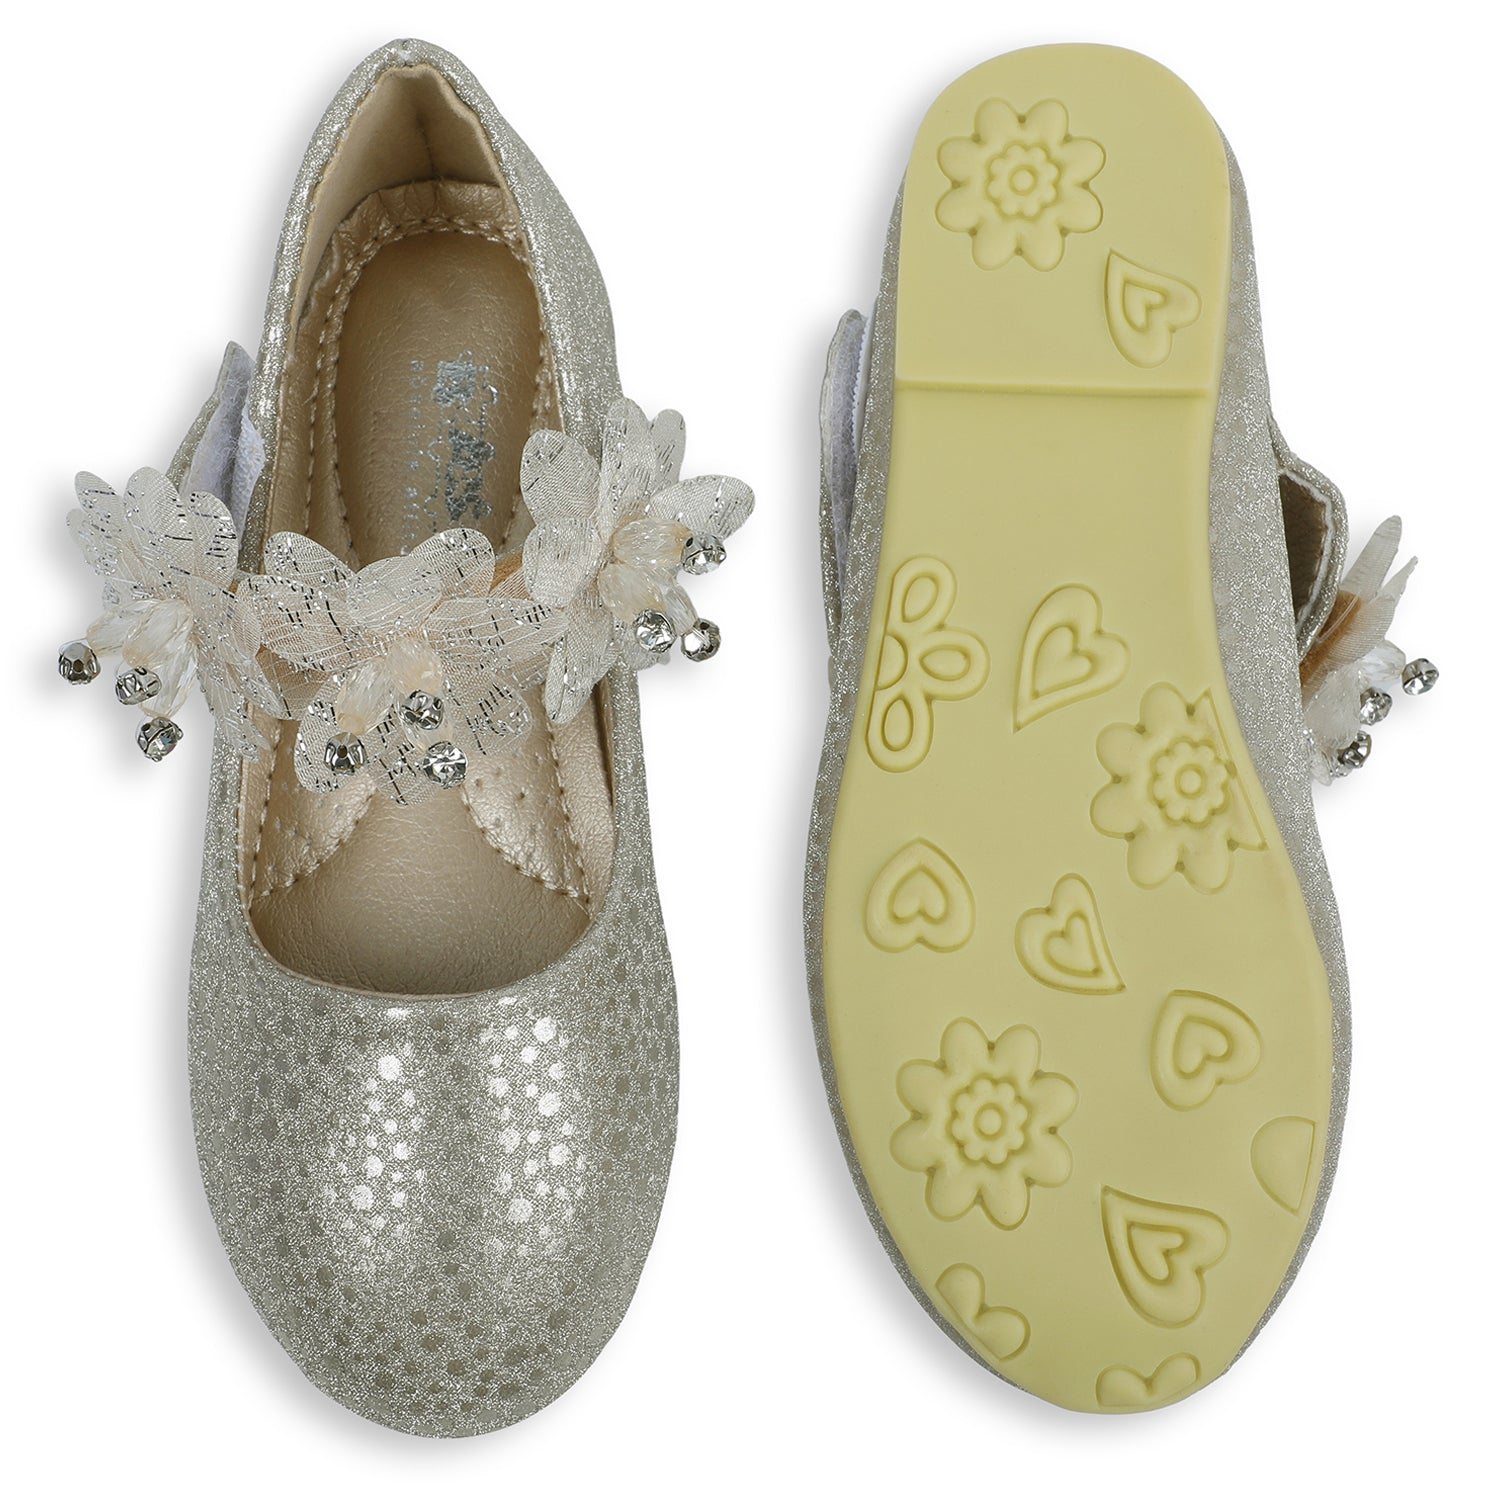 Baby Moo x Bash Kids Shiny Floral Party Mary Jane Ballerinas - Gold